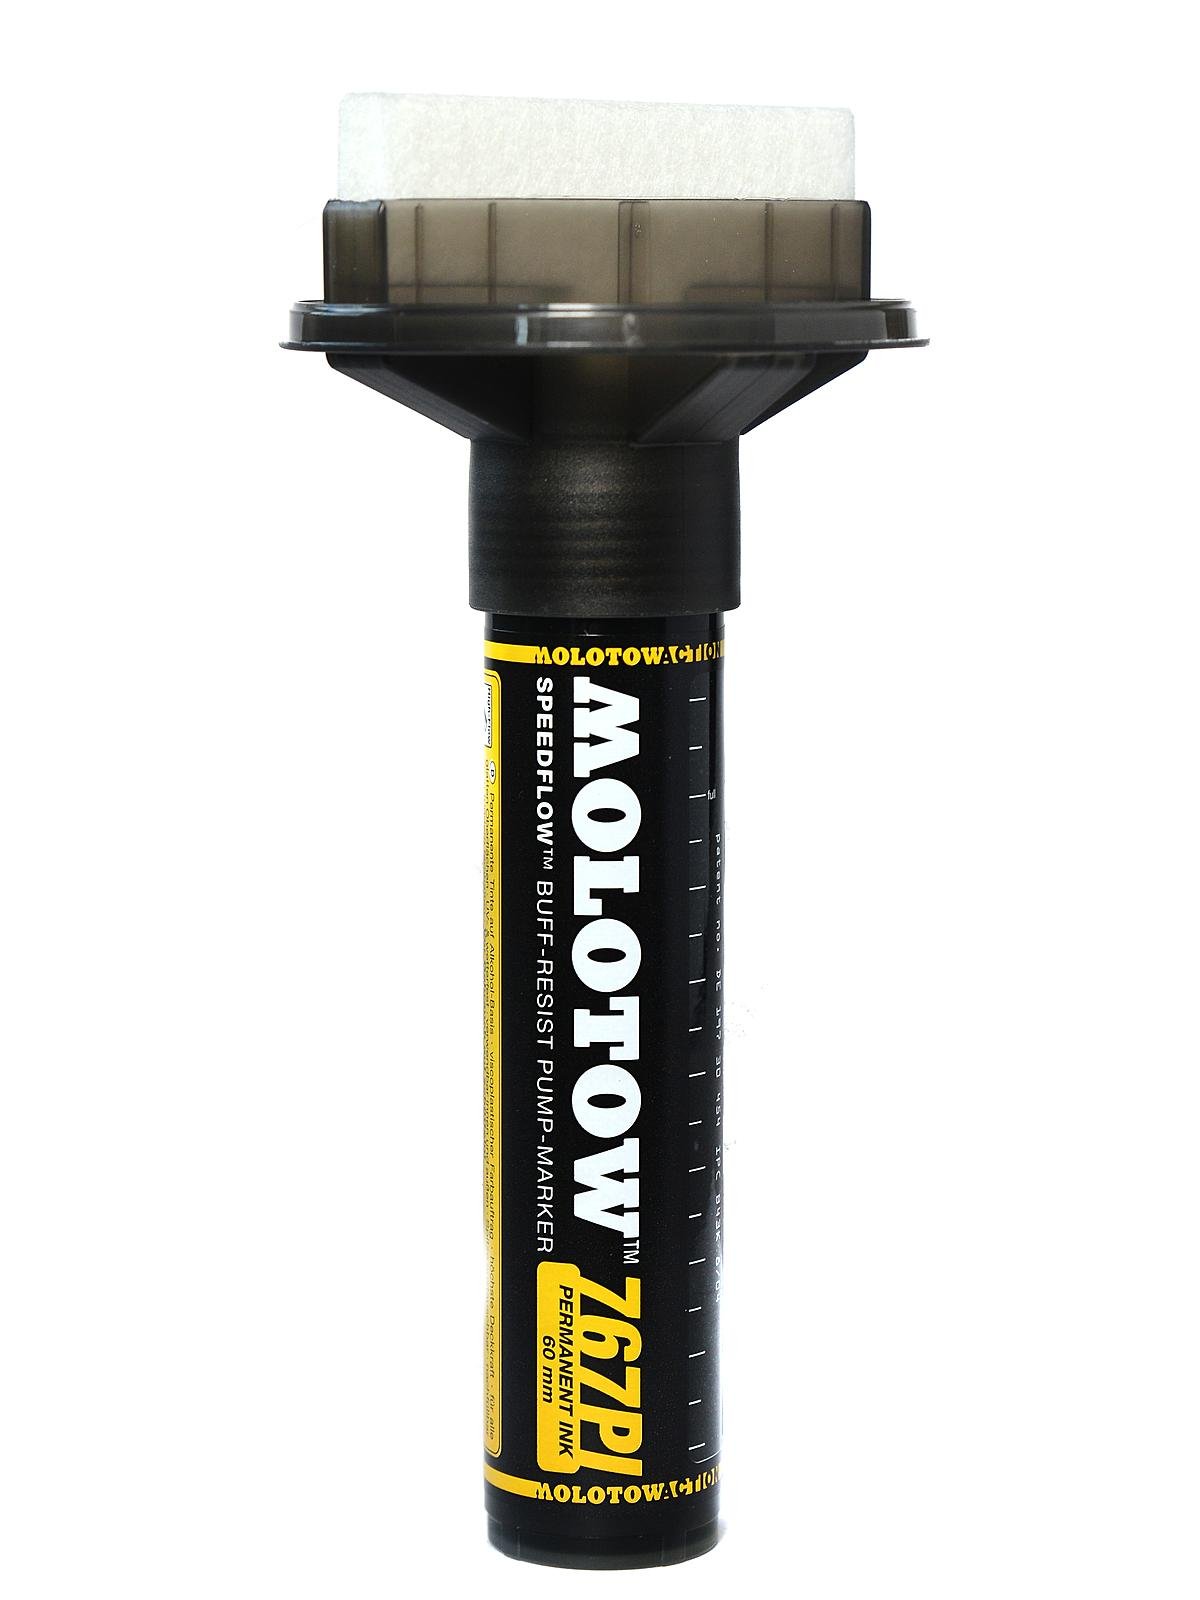 COVERSALL action marker